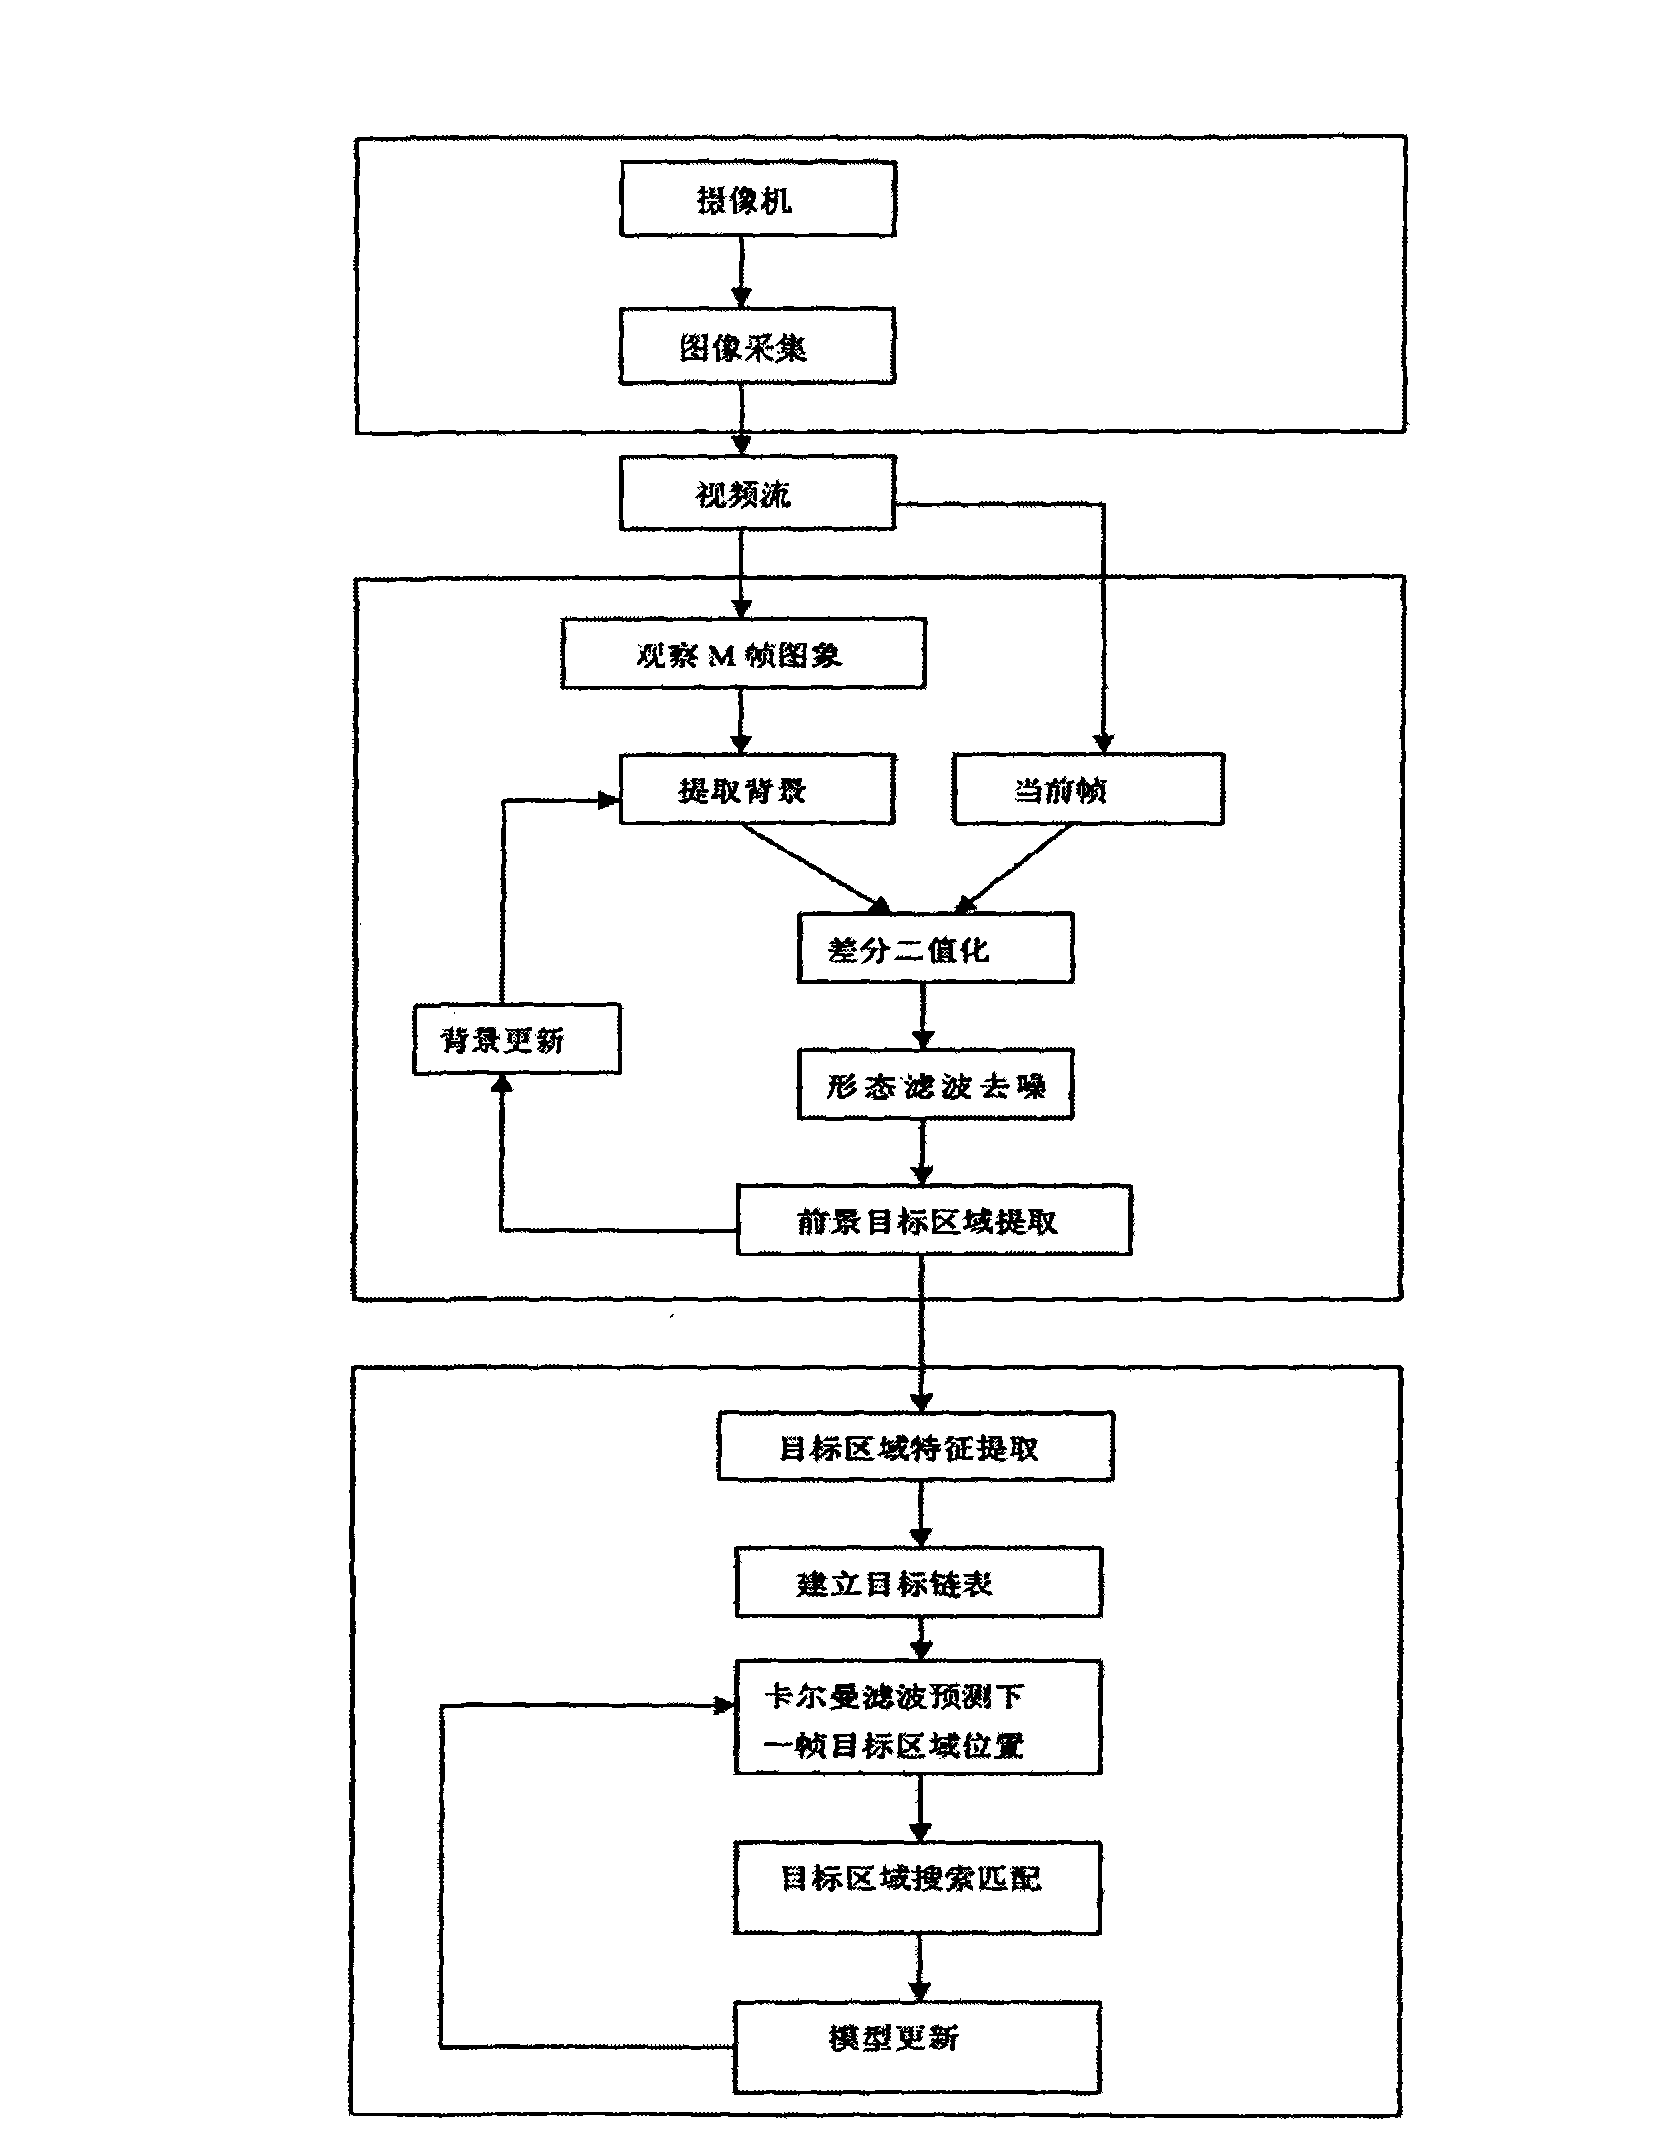 Intelligent video monitoring method and system thereof